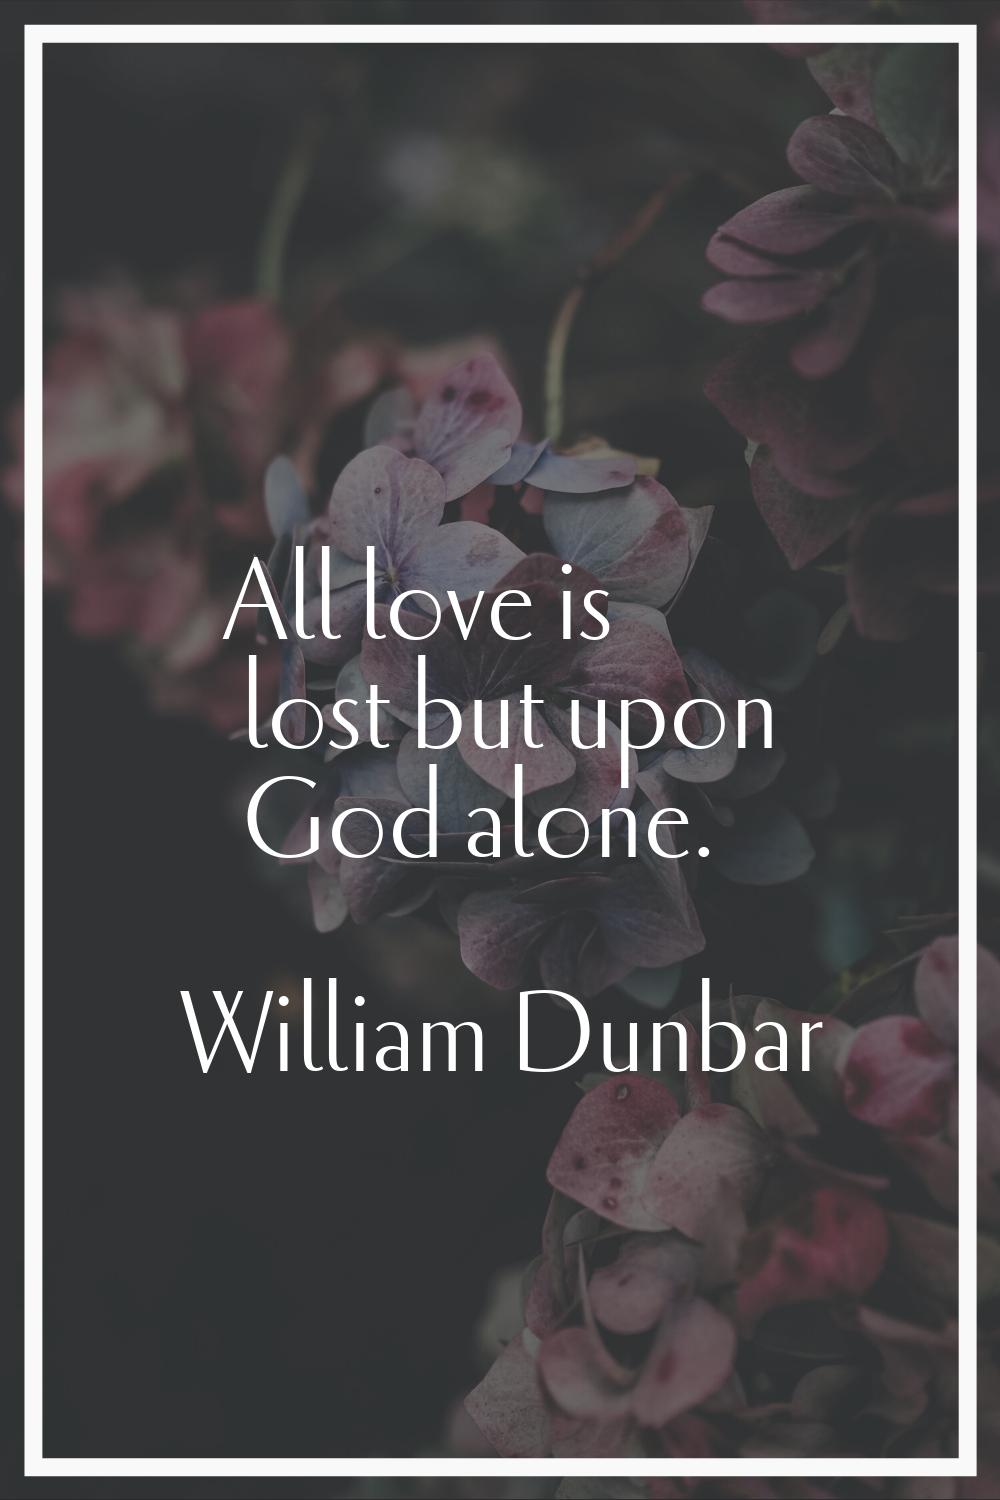 All love is lost but upon God alone.